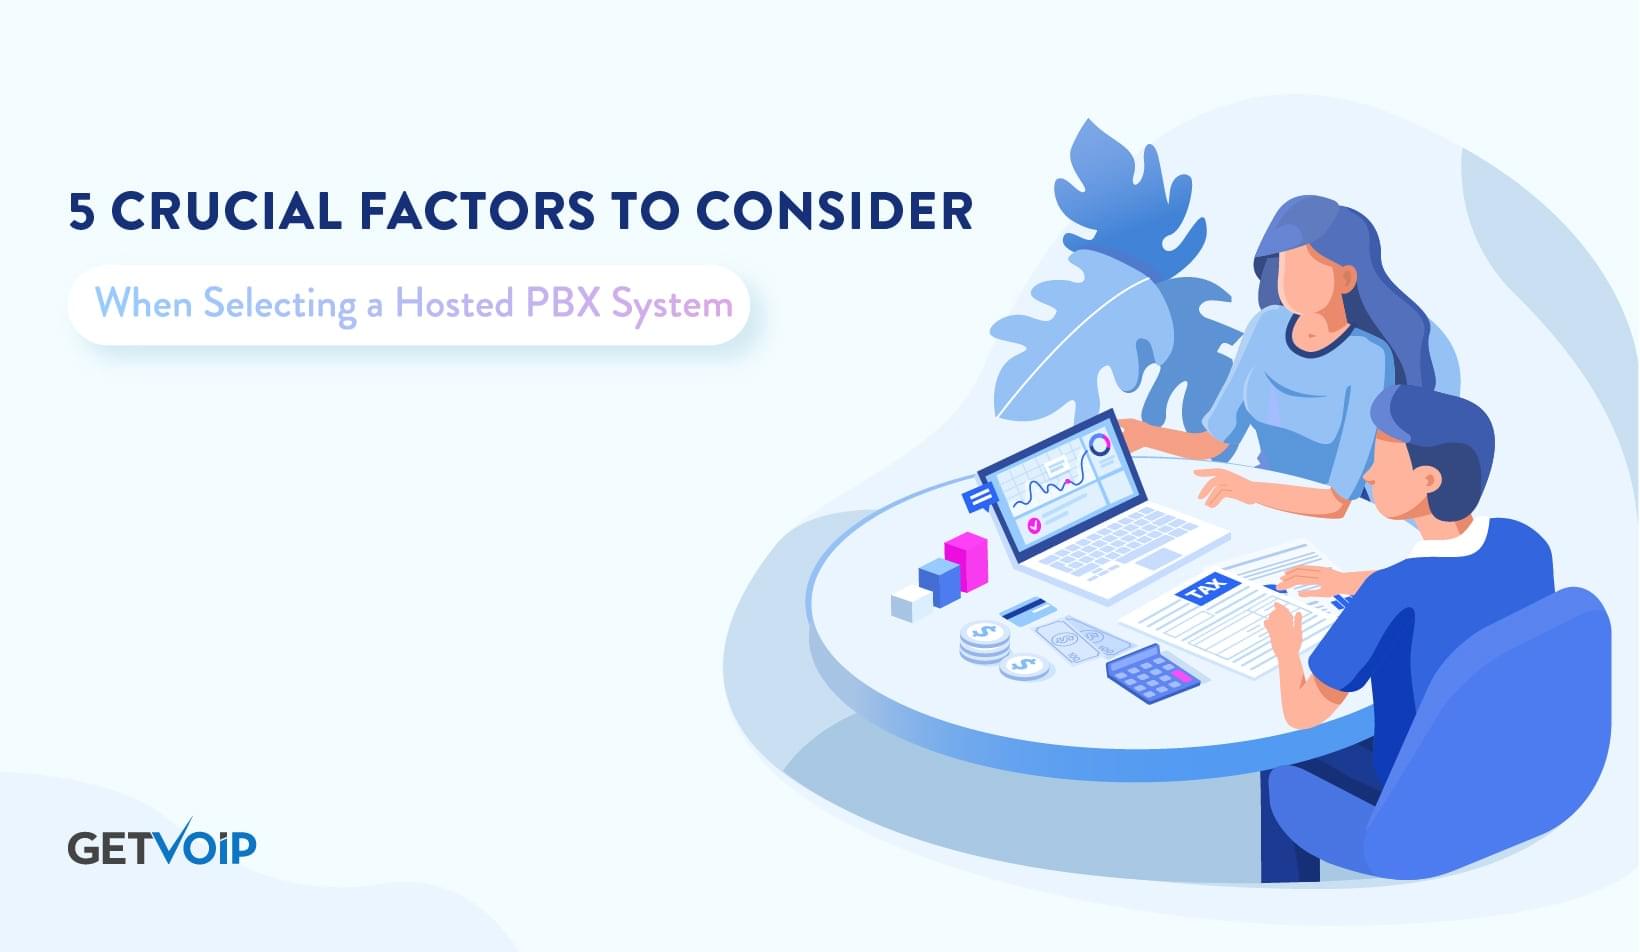 5 Crucial Factors To Consider When Selecting a Hosted PBX System